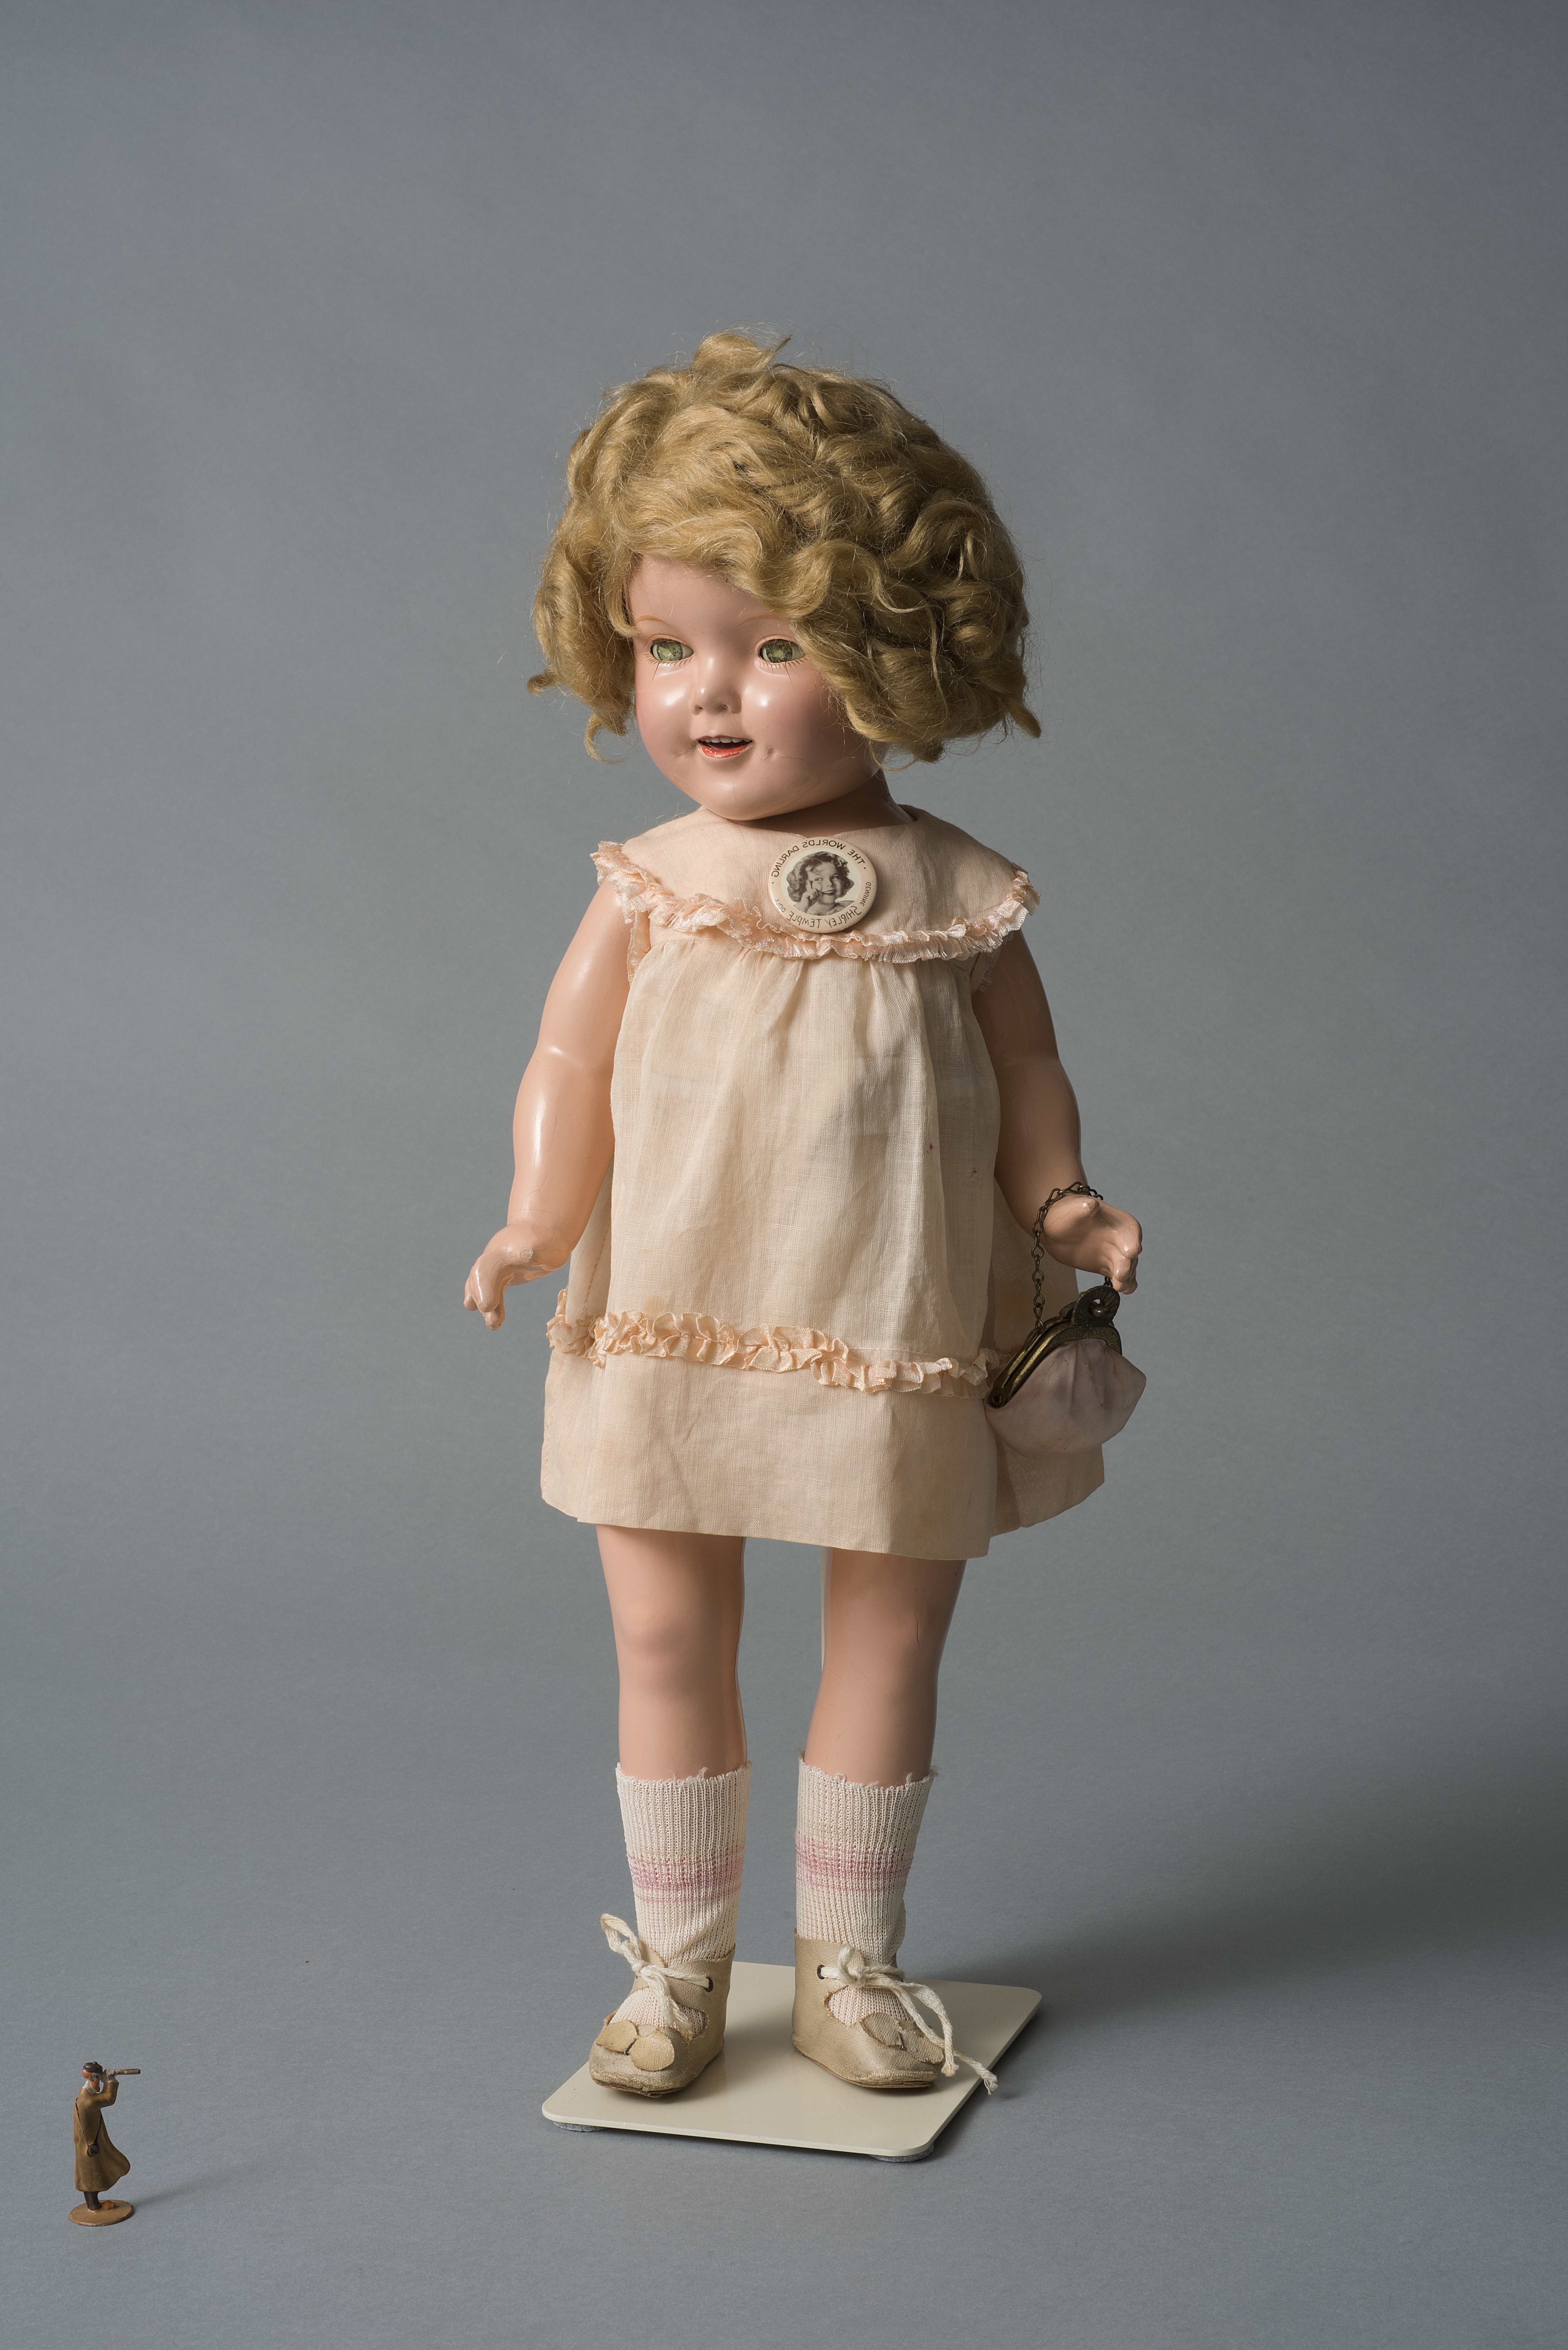 Shirley Temple Puppe (Historisches Spielzeug Berlin e.V. CC BY-NC-SA)